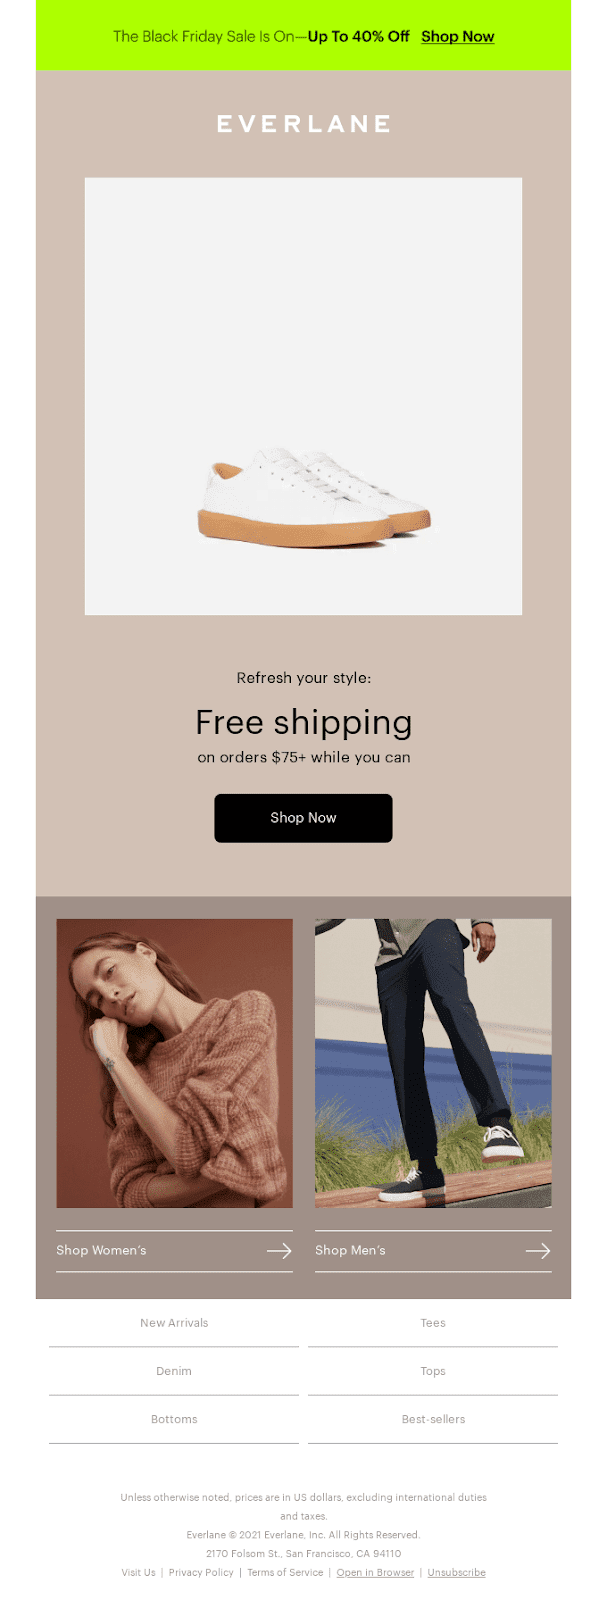 An email showing Everlane promoting its Black Friday sale through email via banners